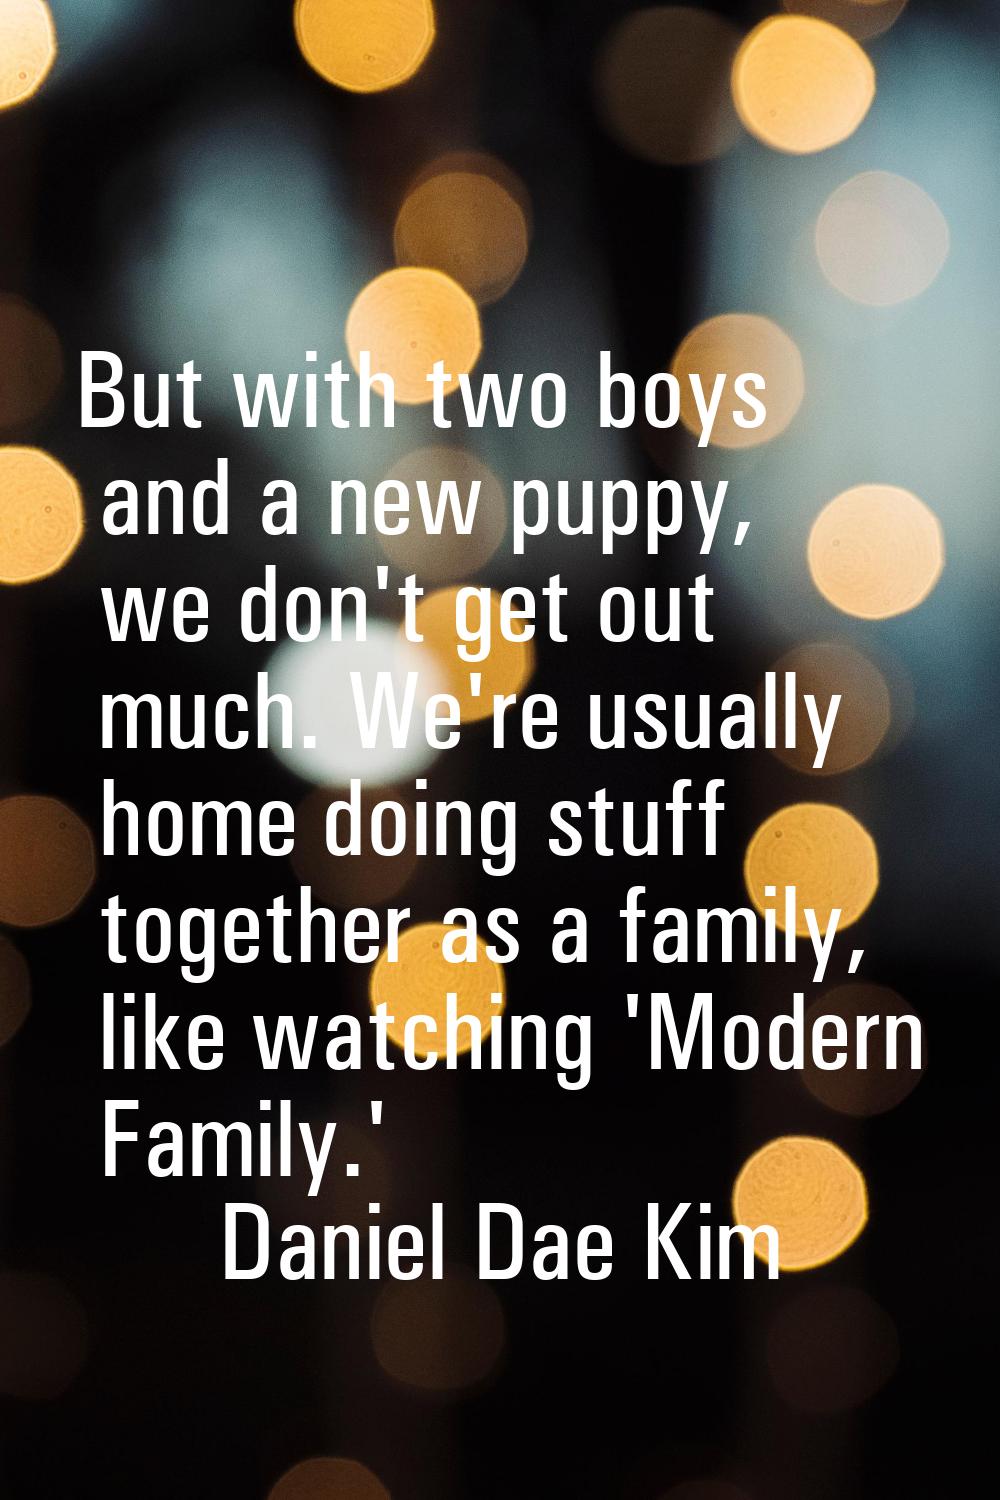 But with two boys and a new puppy, we don't get out much. We're usually home doing stuff together a